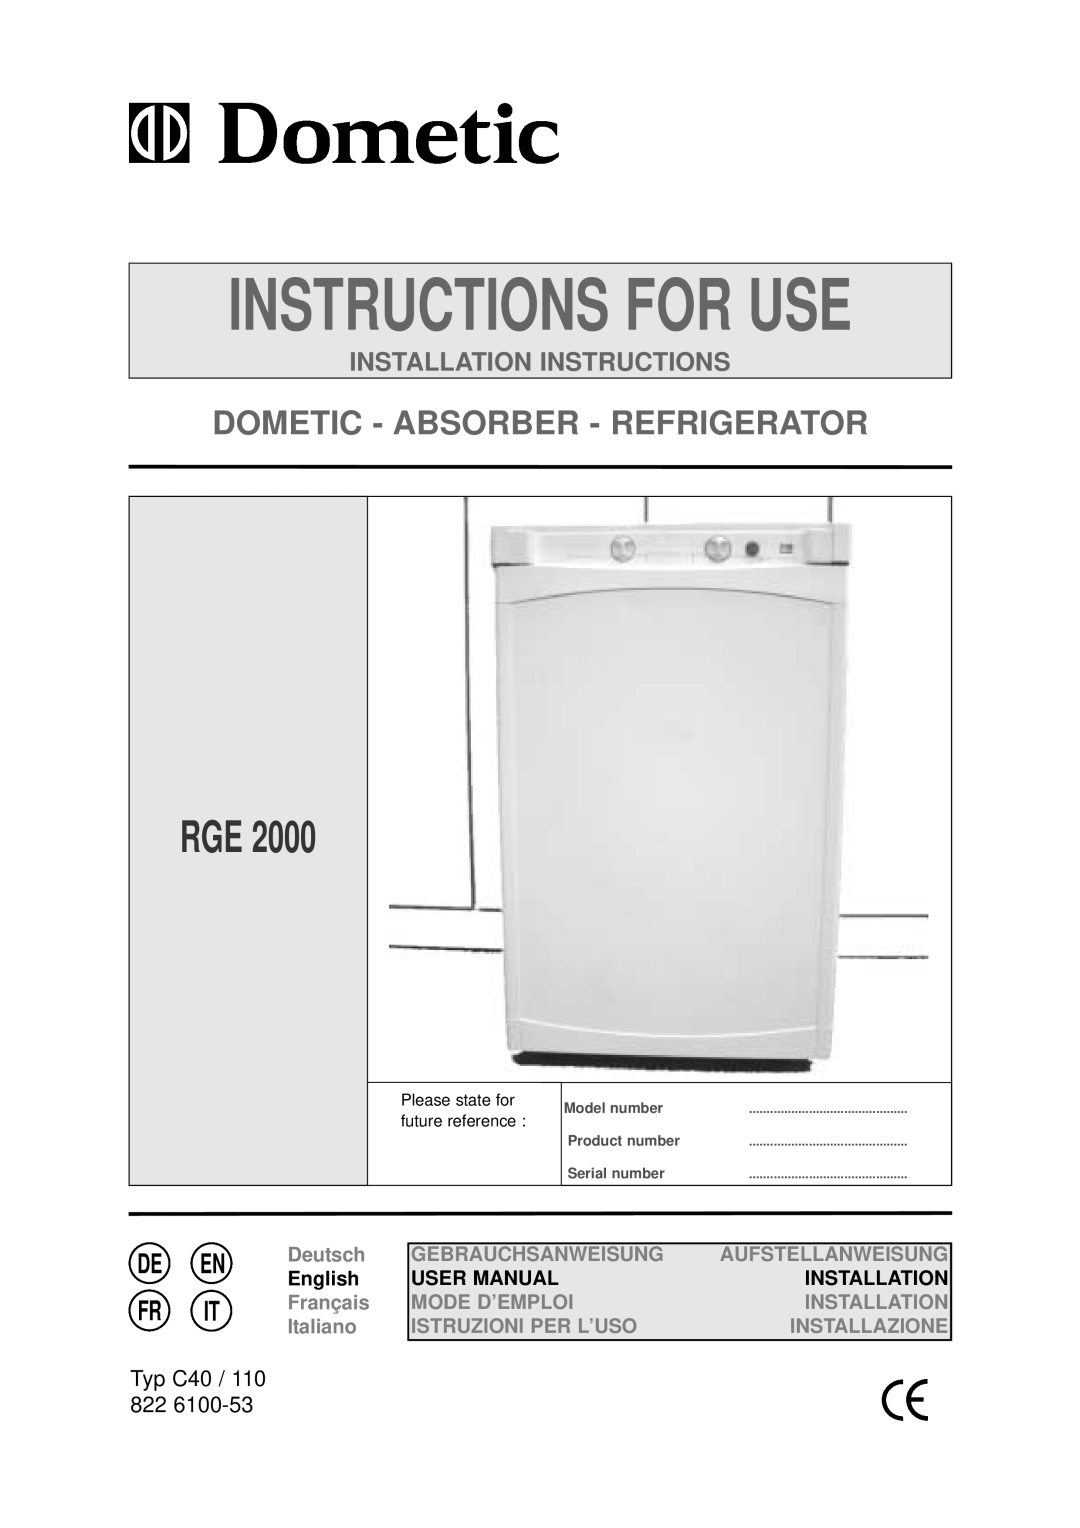 Dometic RGE 2000 installation instructions Dometic - Absorber - Refrigerator, Instructions For Use, De En Fr It 